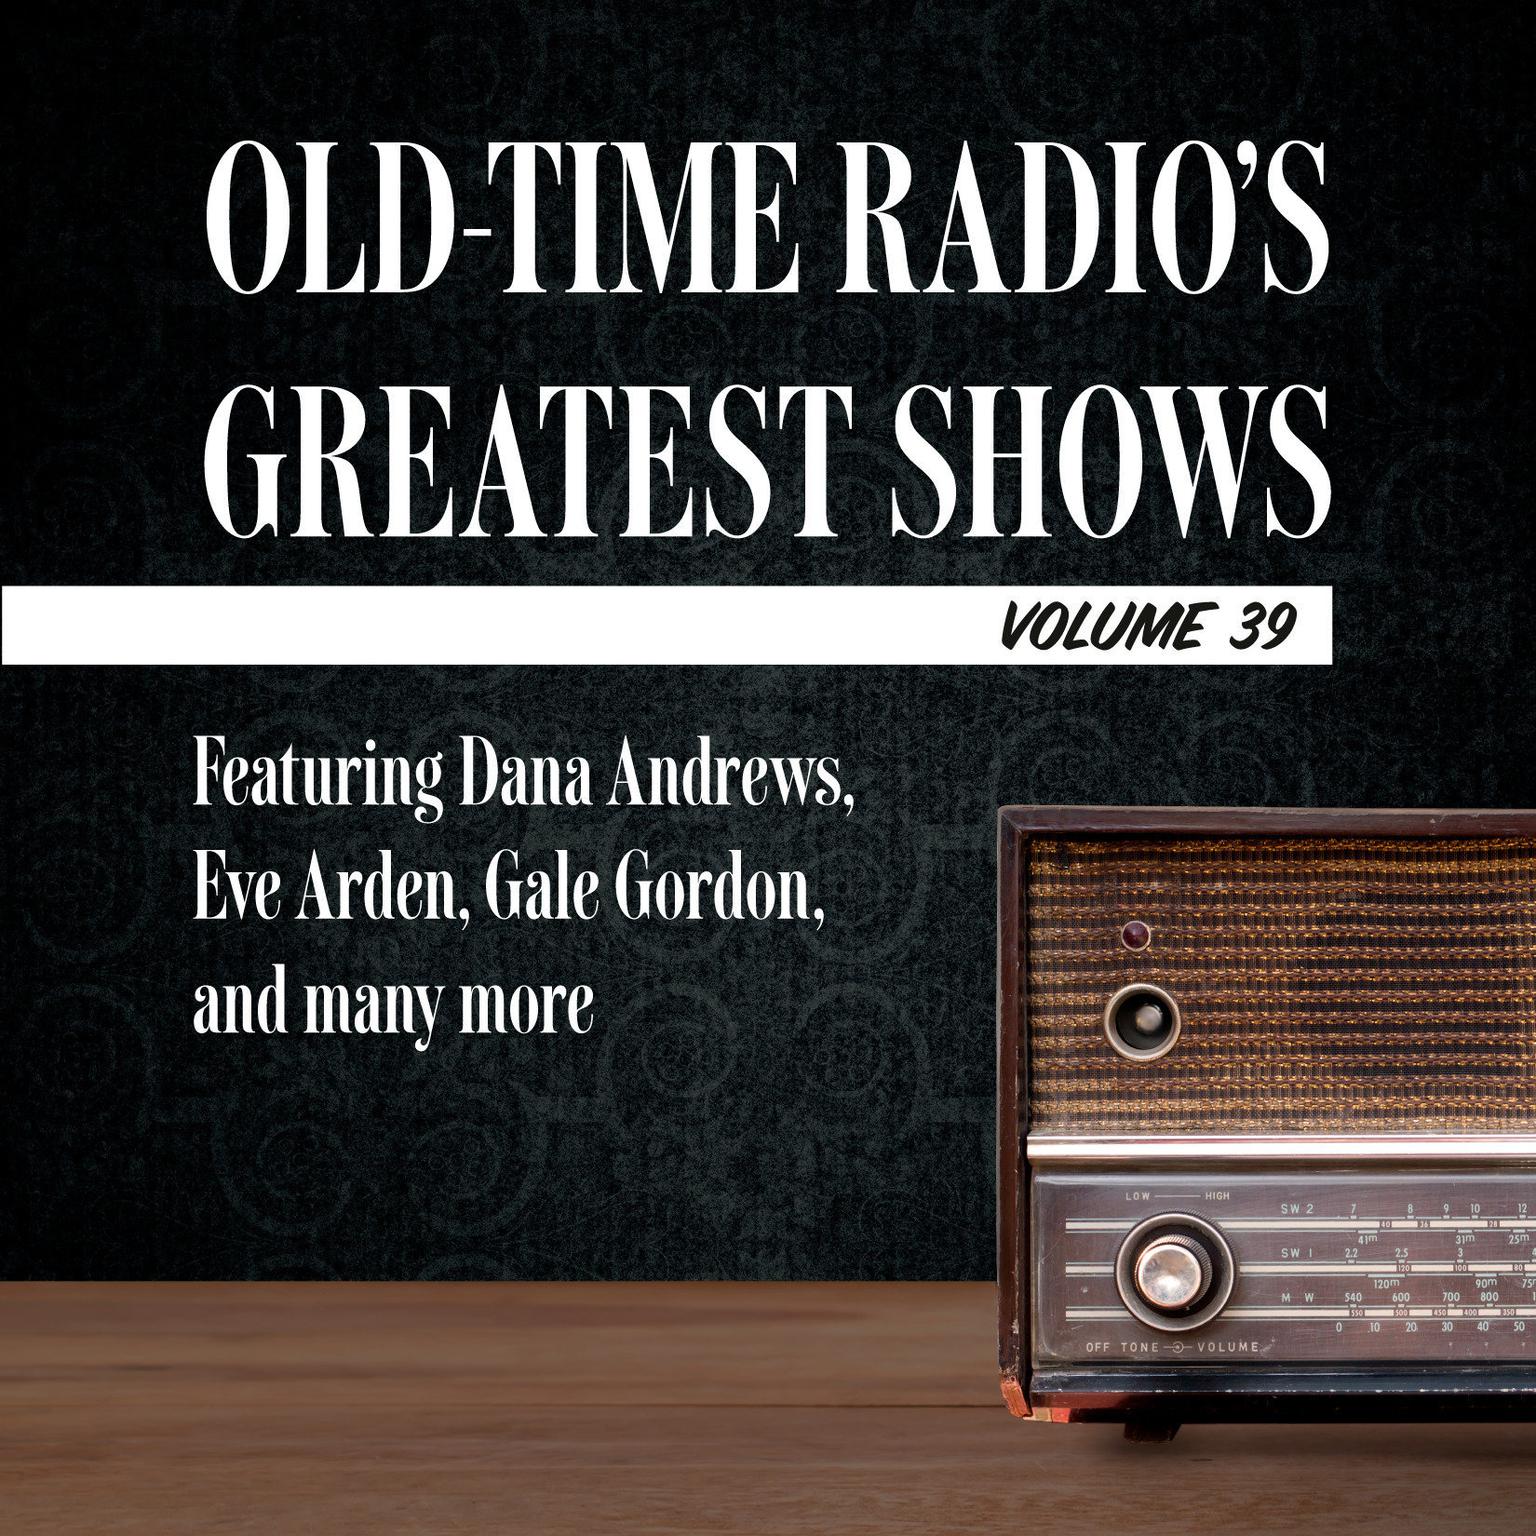 Old-Time Radios Greatest Shows, Volume 39: Featuring Dana Andrews, Eve Arden, Gale Gordon, and many more Audiobook, by Carl Amari